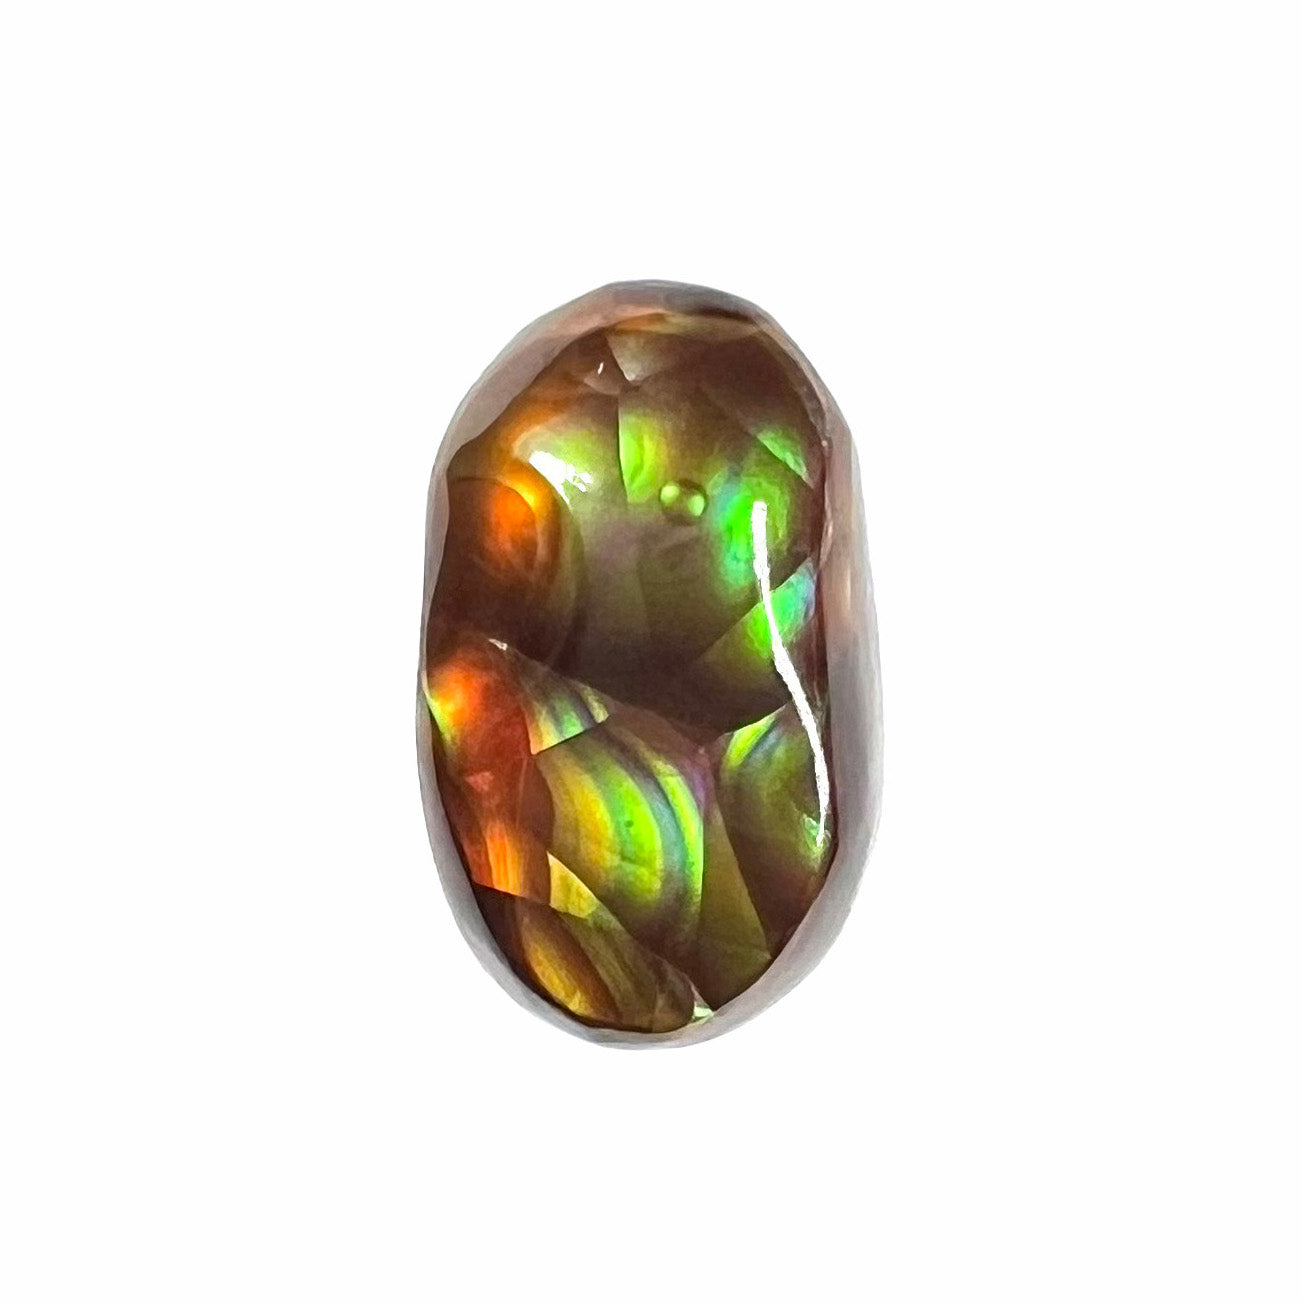 A loose, oval cabochon cut Mexican fire agate stone.  The stone has multi-colored banding with blue overtones.